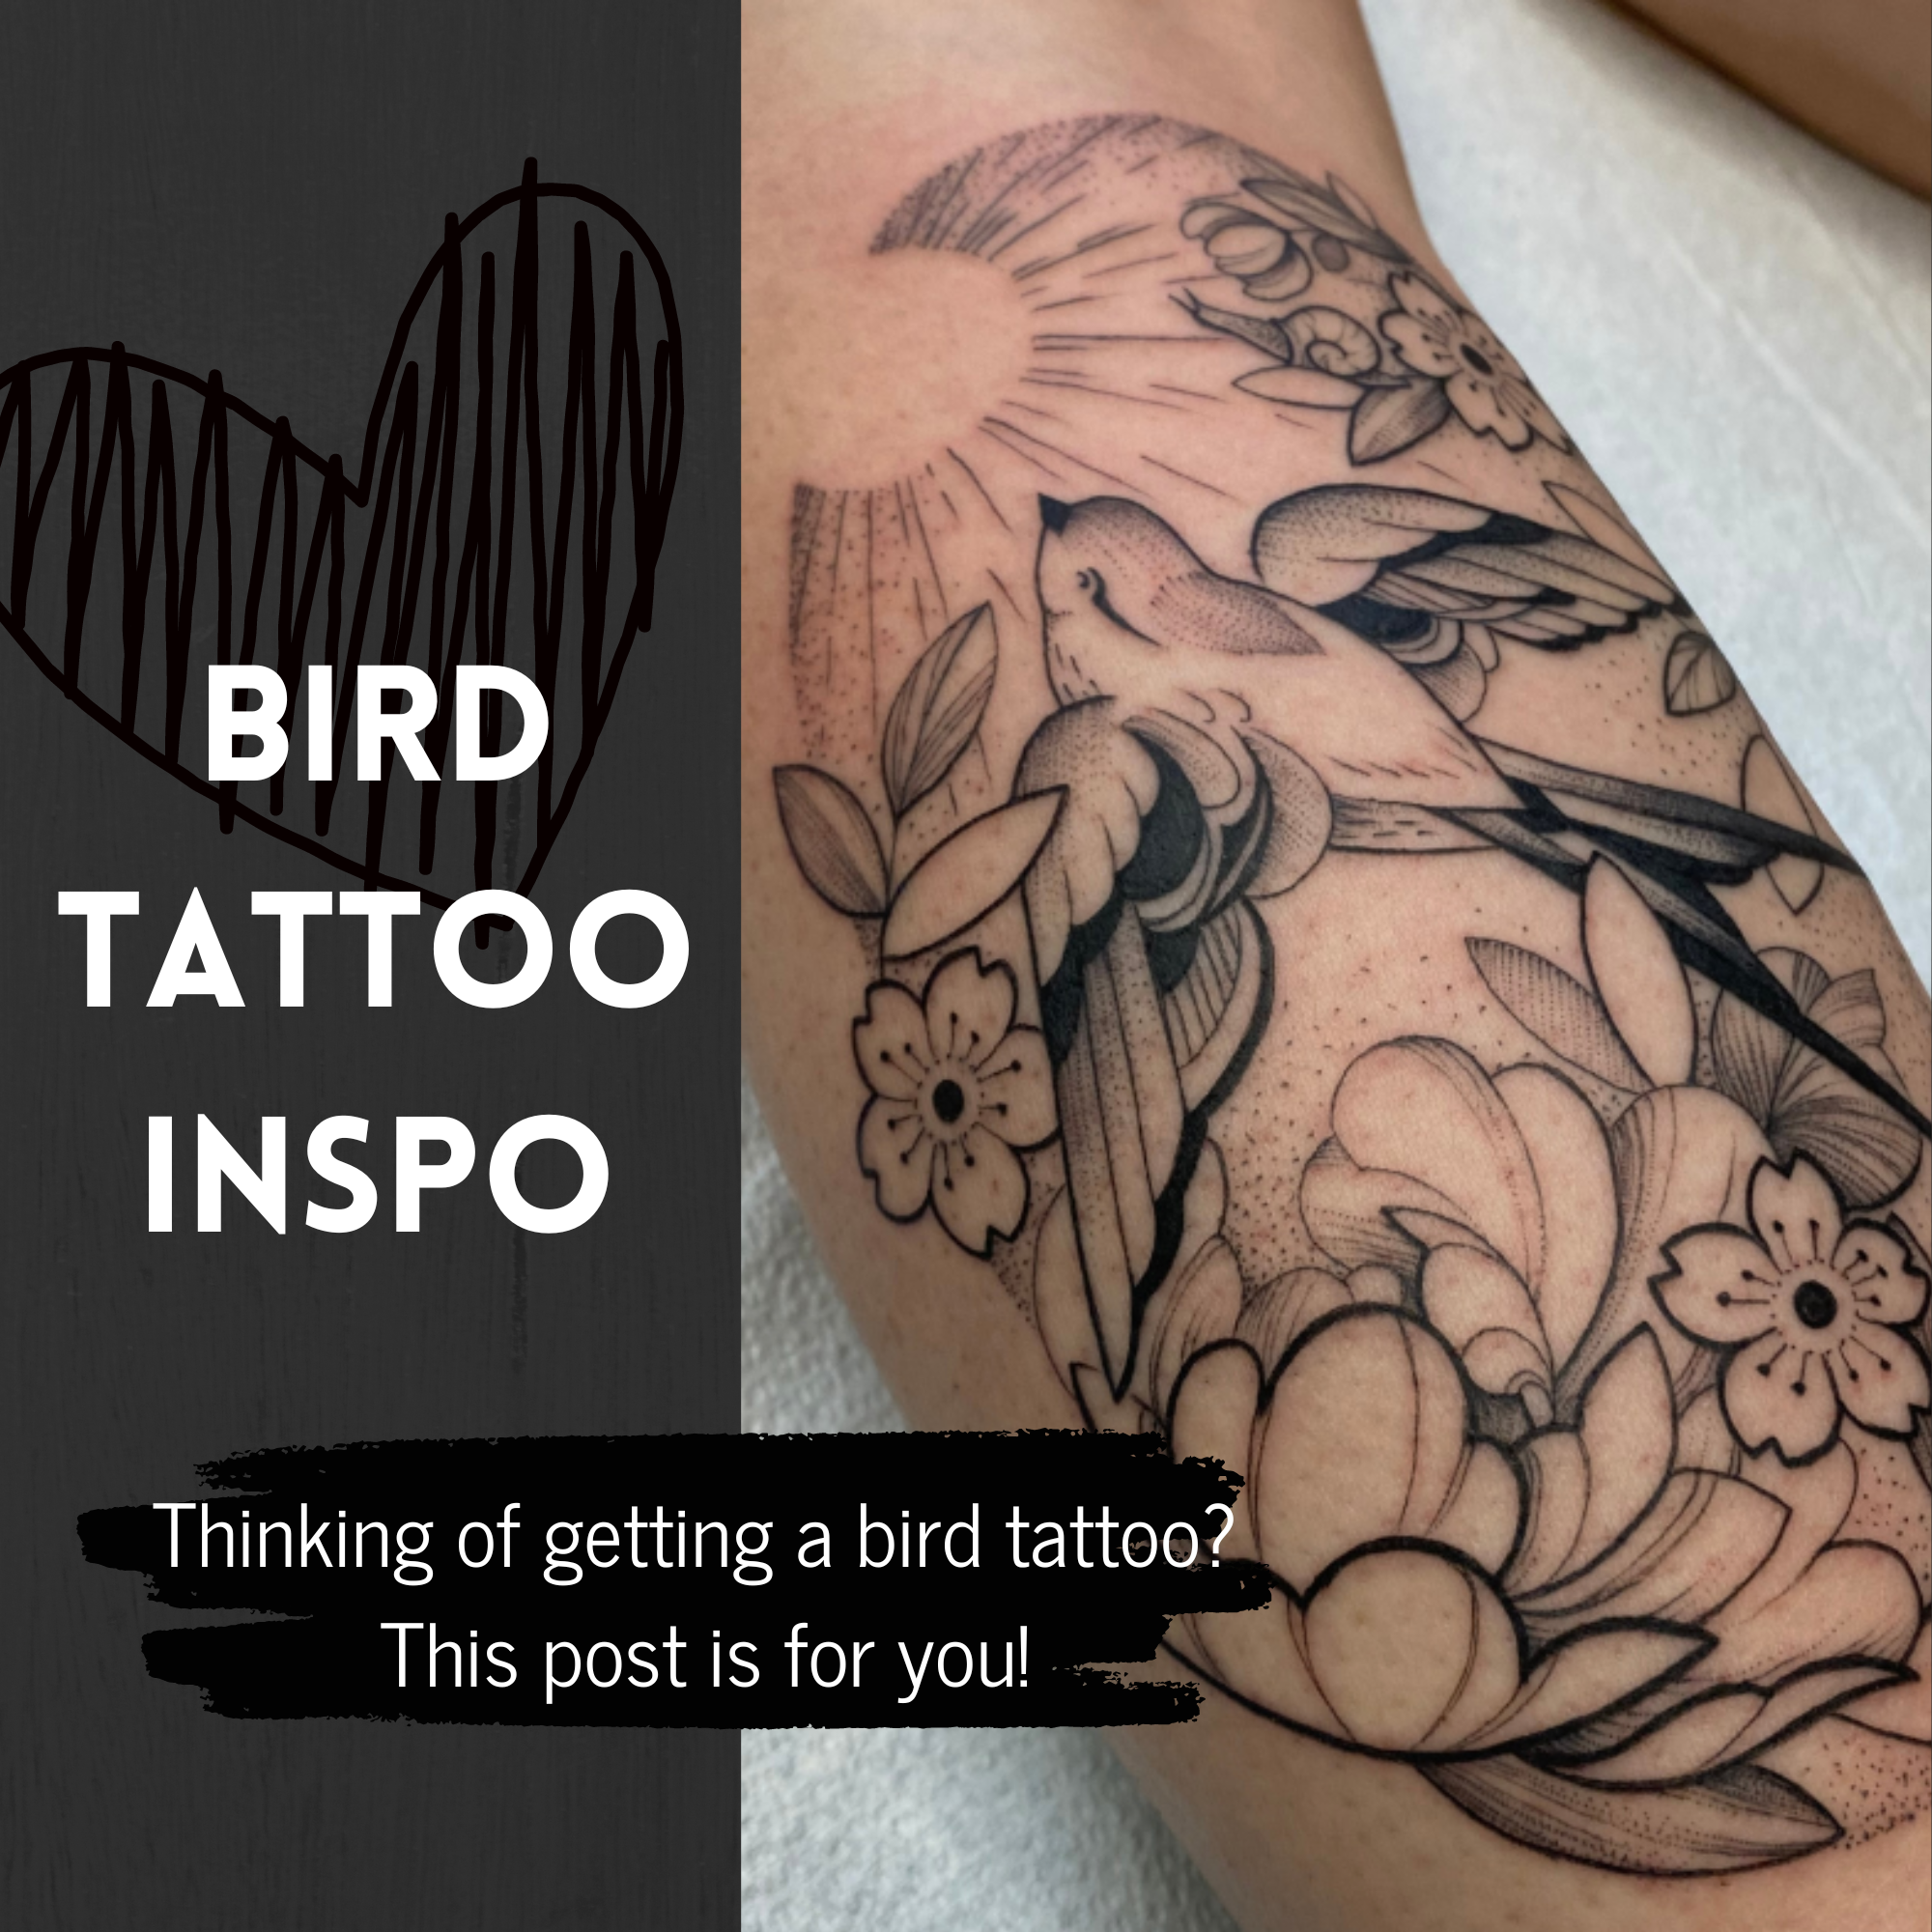 CONFESSIONS OF A FEMALE TATTOO ARTIST – The Spark Company